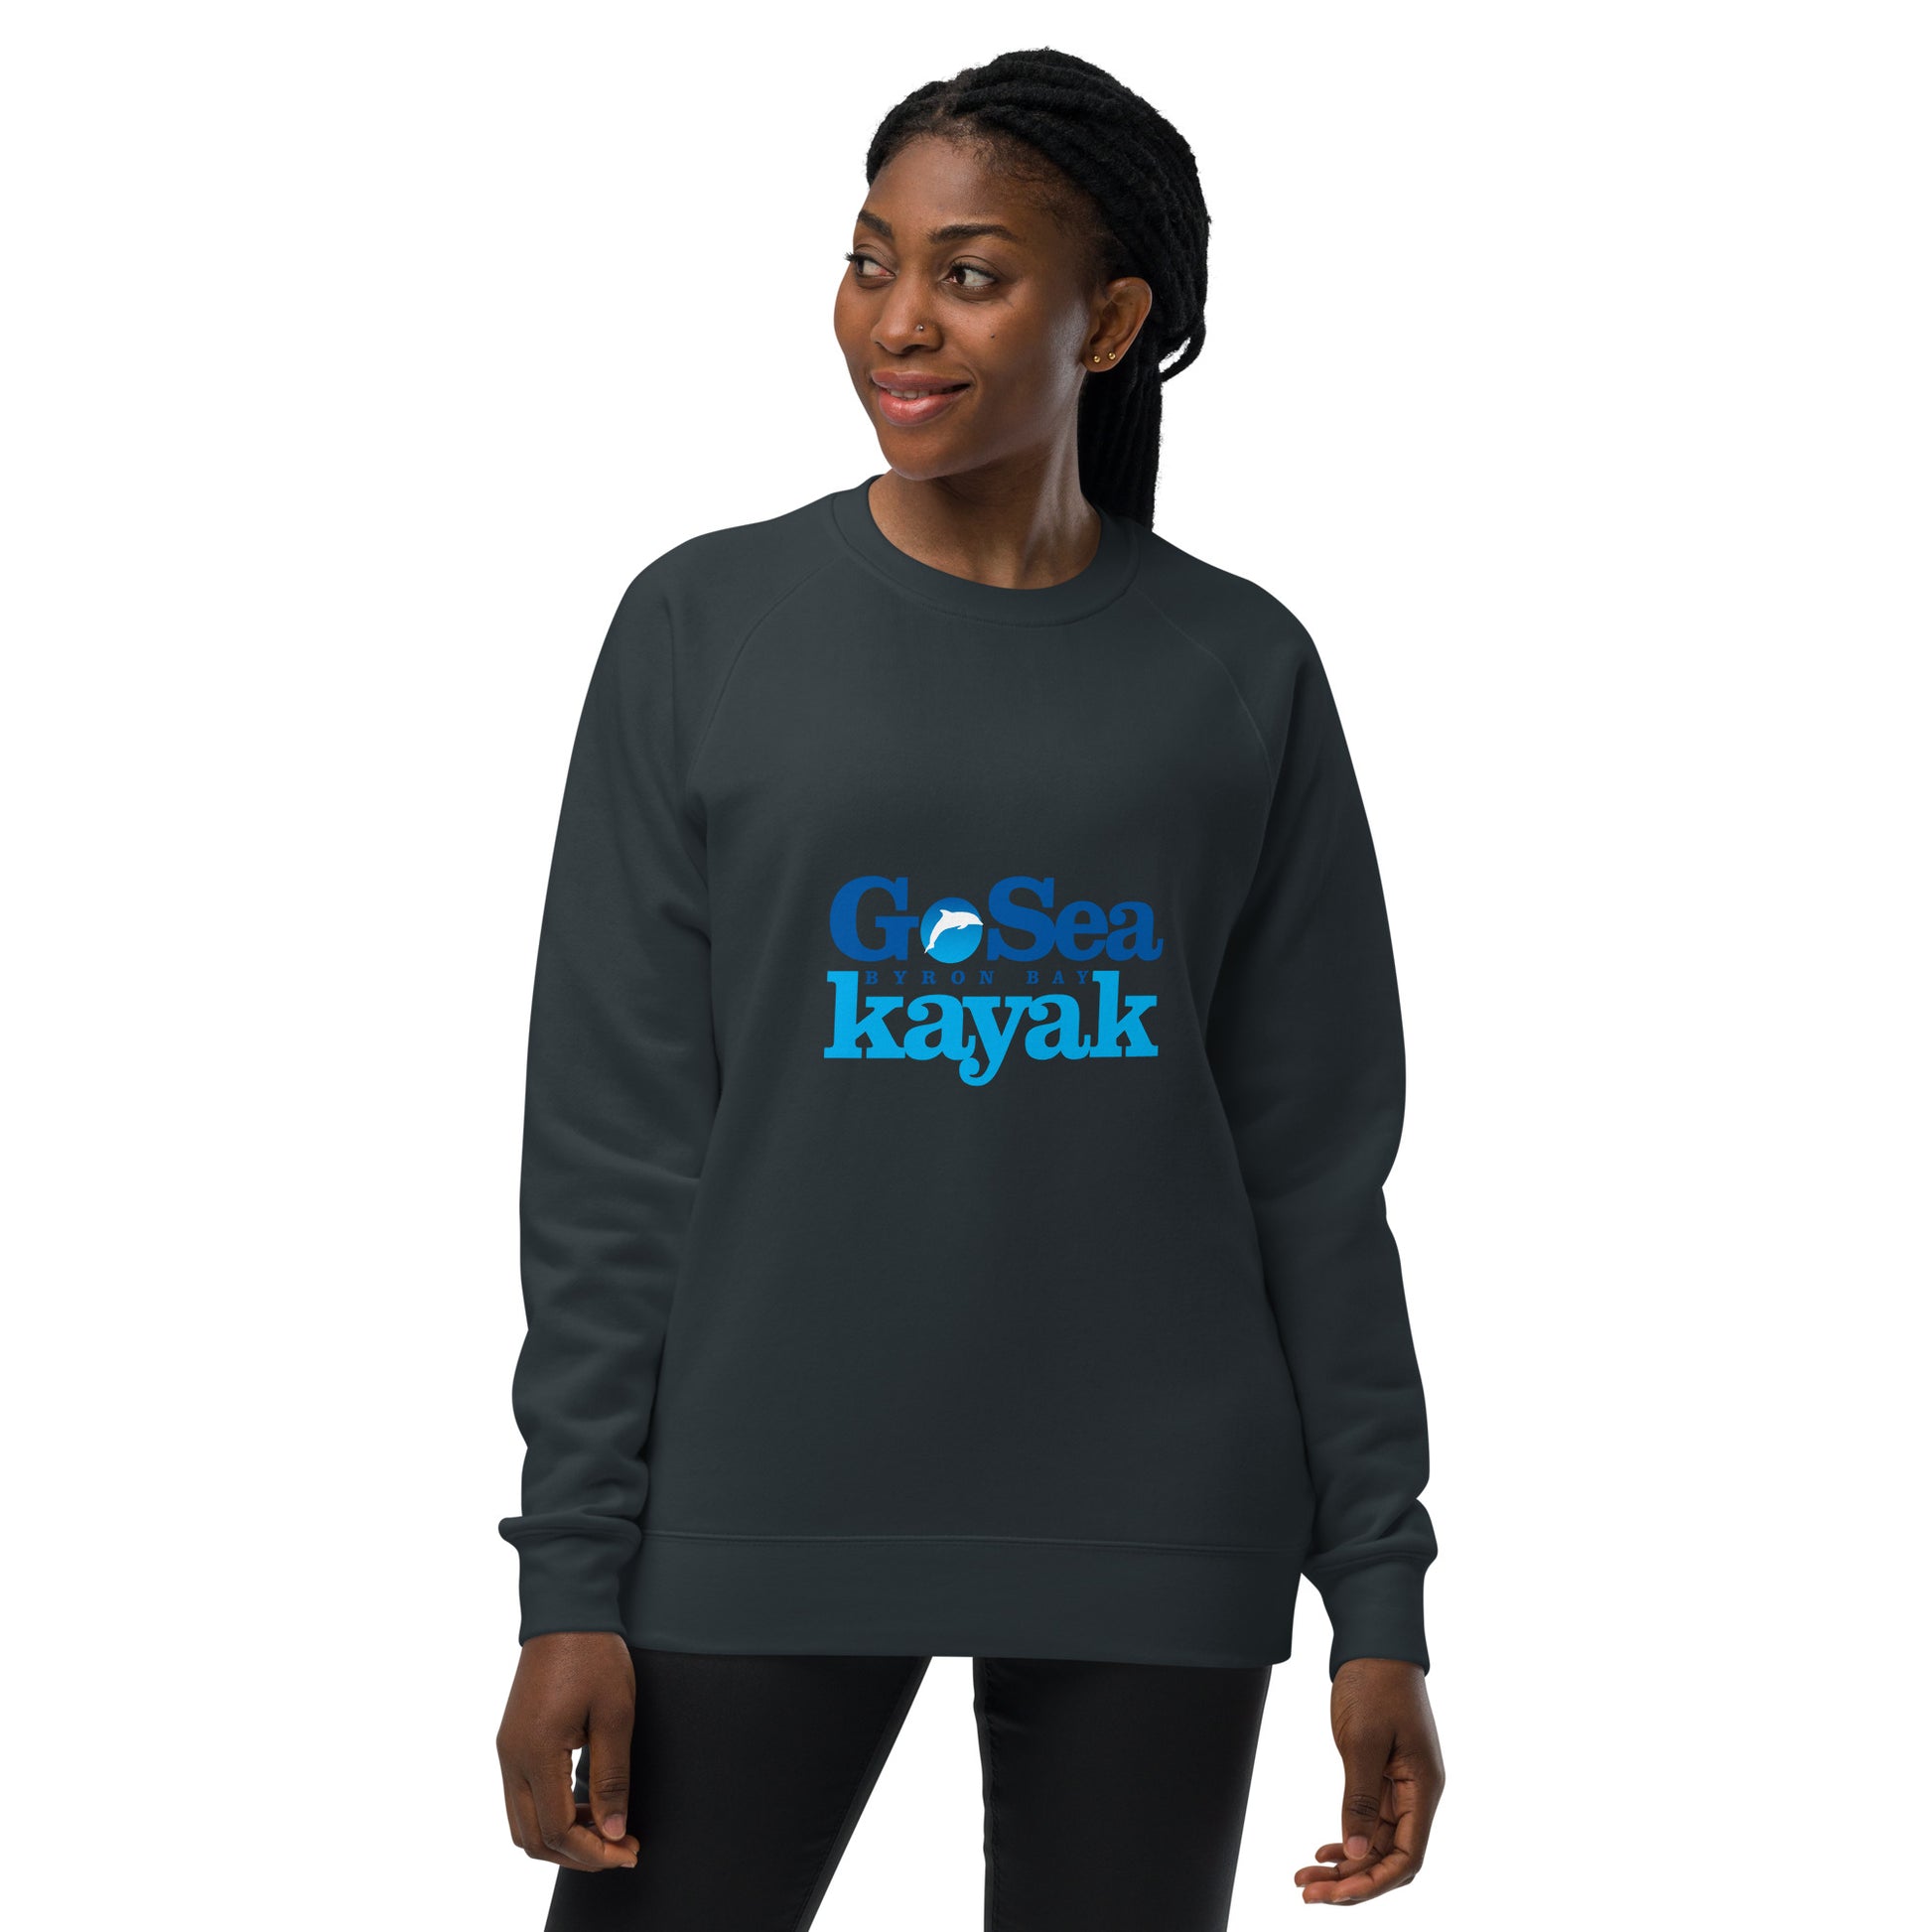  Unisex Sweatshirt - Navy - Front view being warn by woman with arms by side - Go Sea Kayak Byron Bay logo on front - Genuine Byron Bay Merchandise | Produced by Go Sea Kayak Byron Bay 